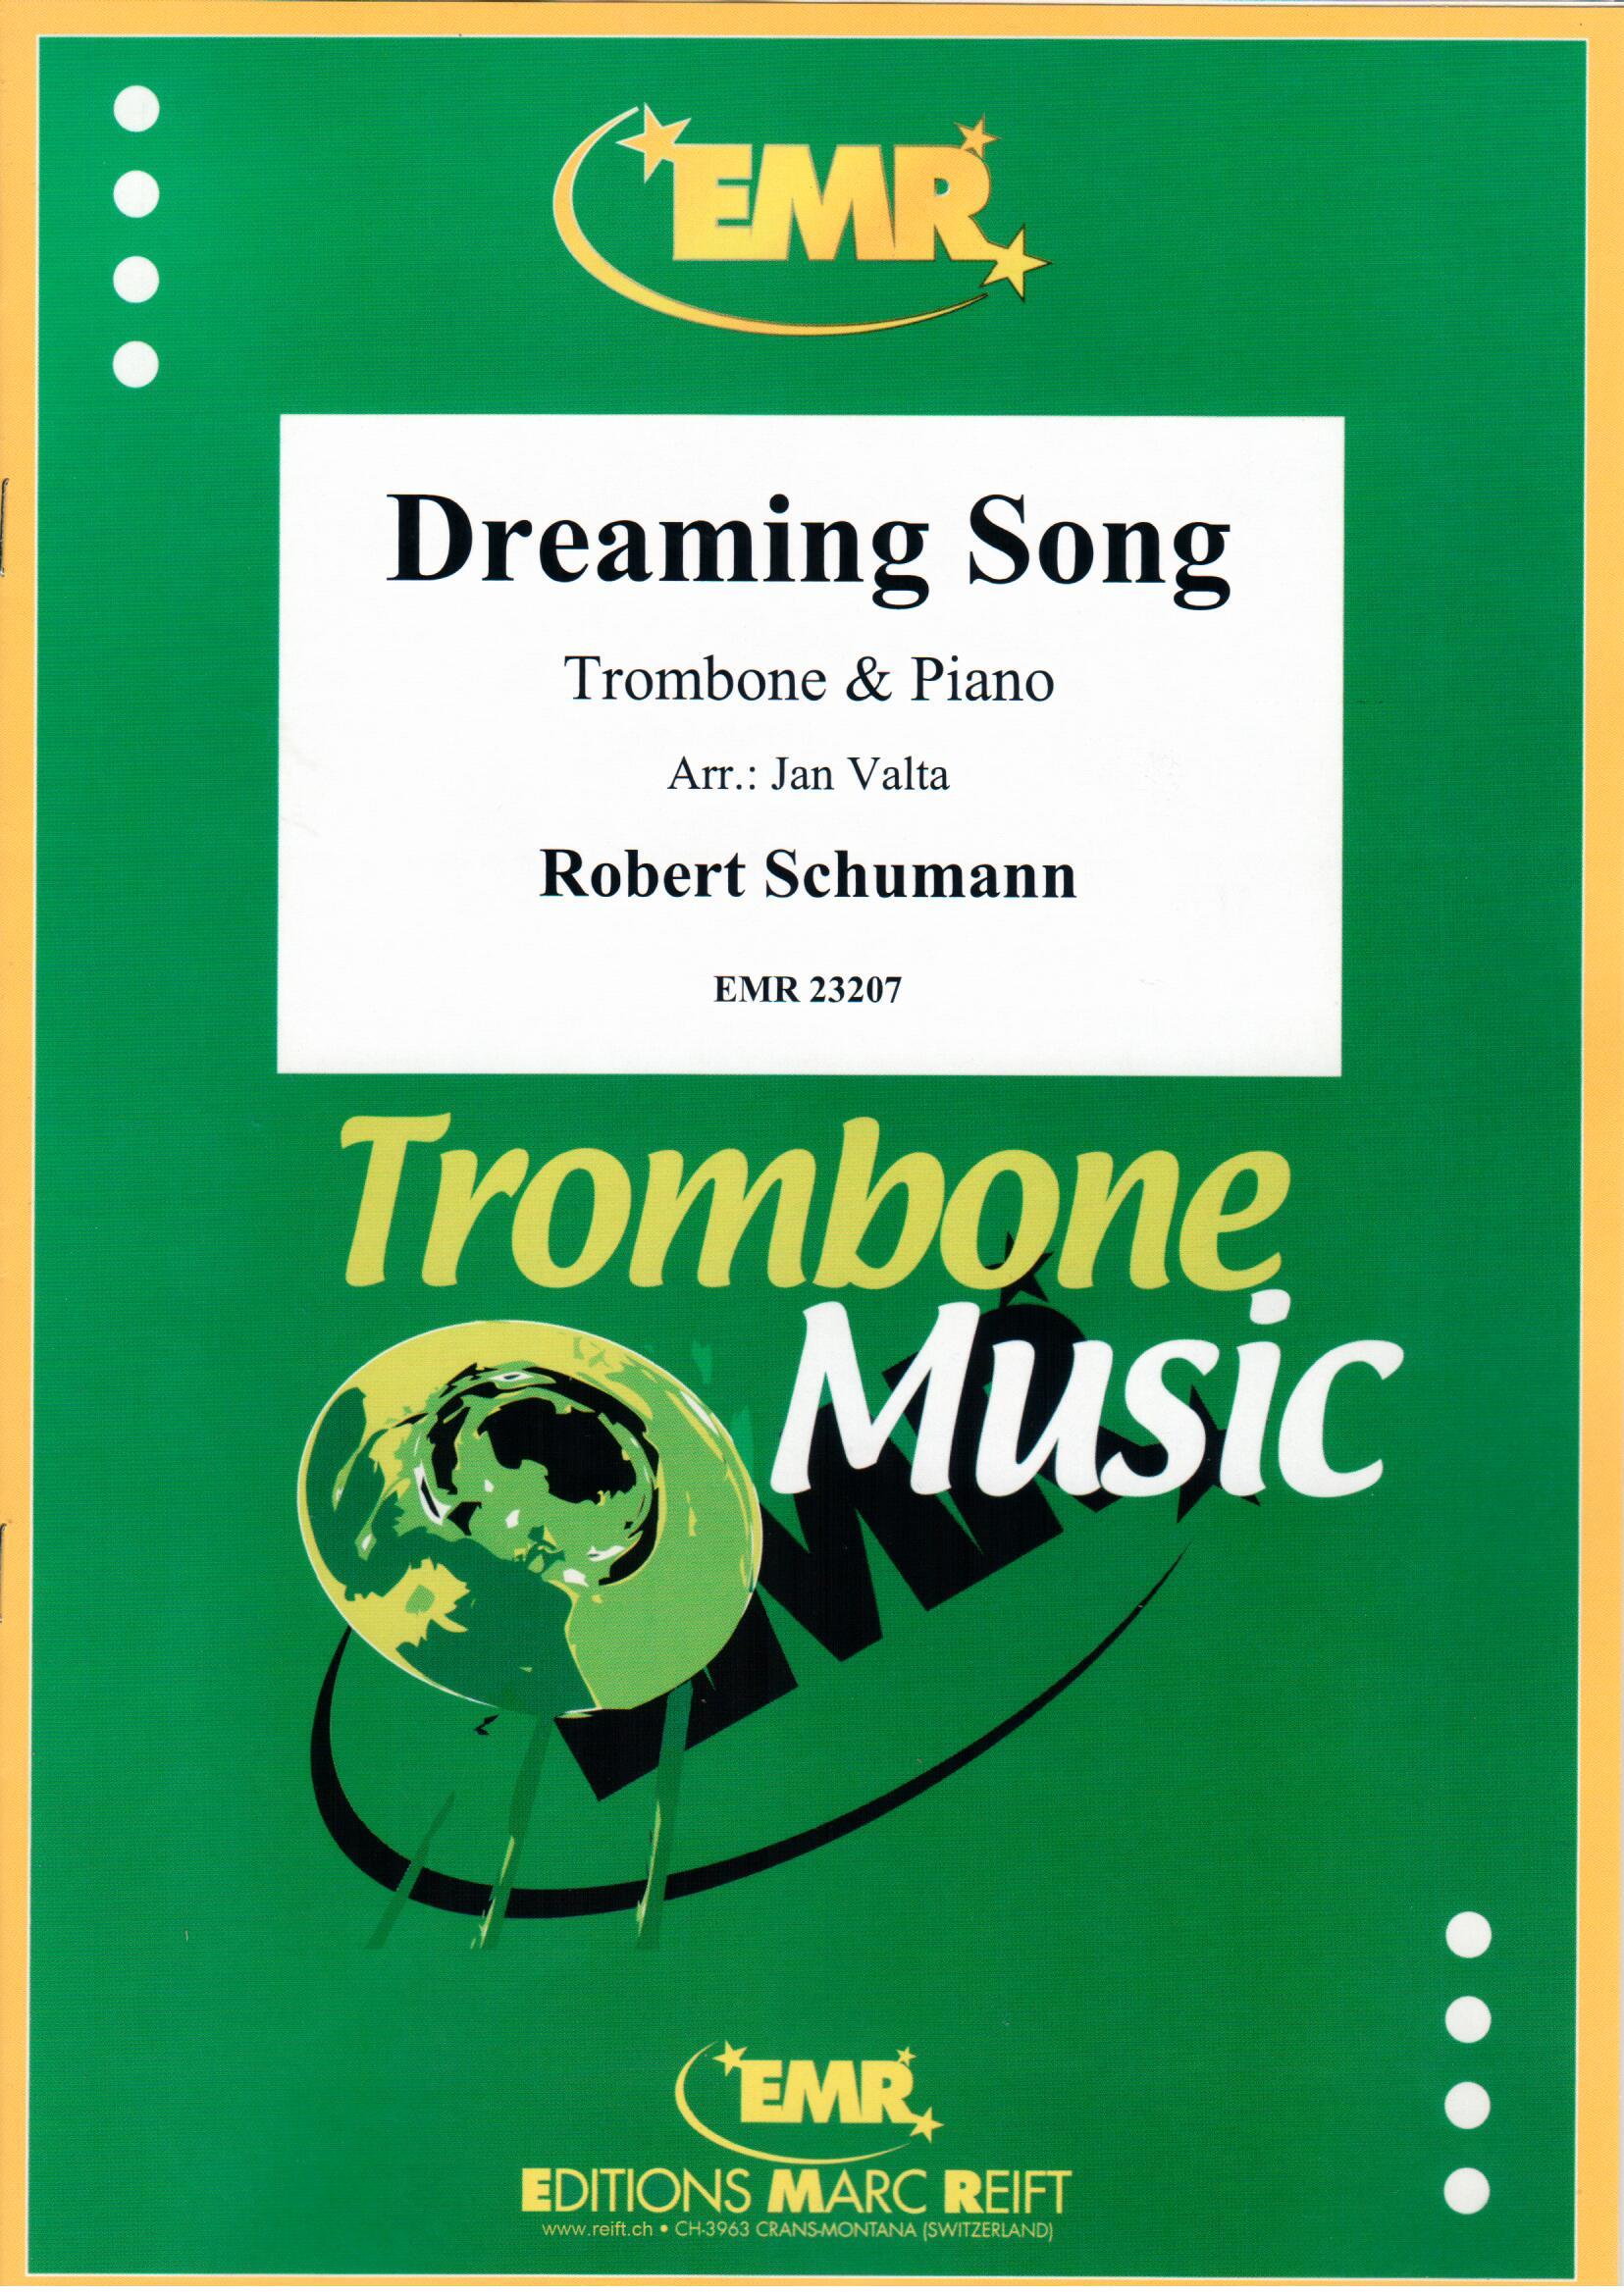 DREAMING SONG, SOLOS - Trombone